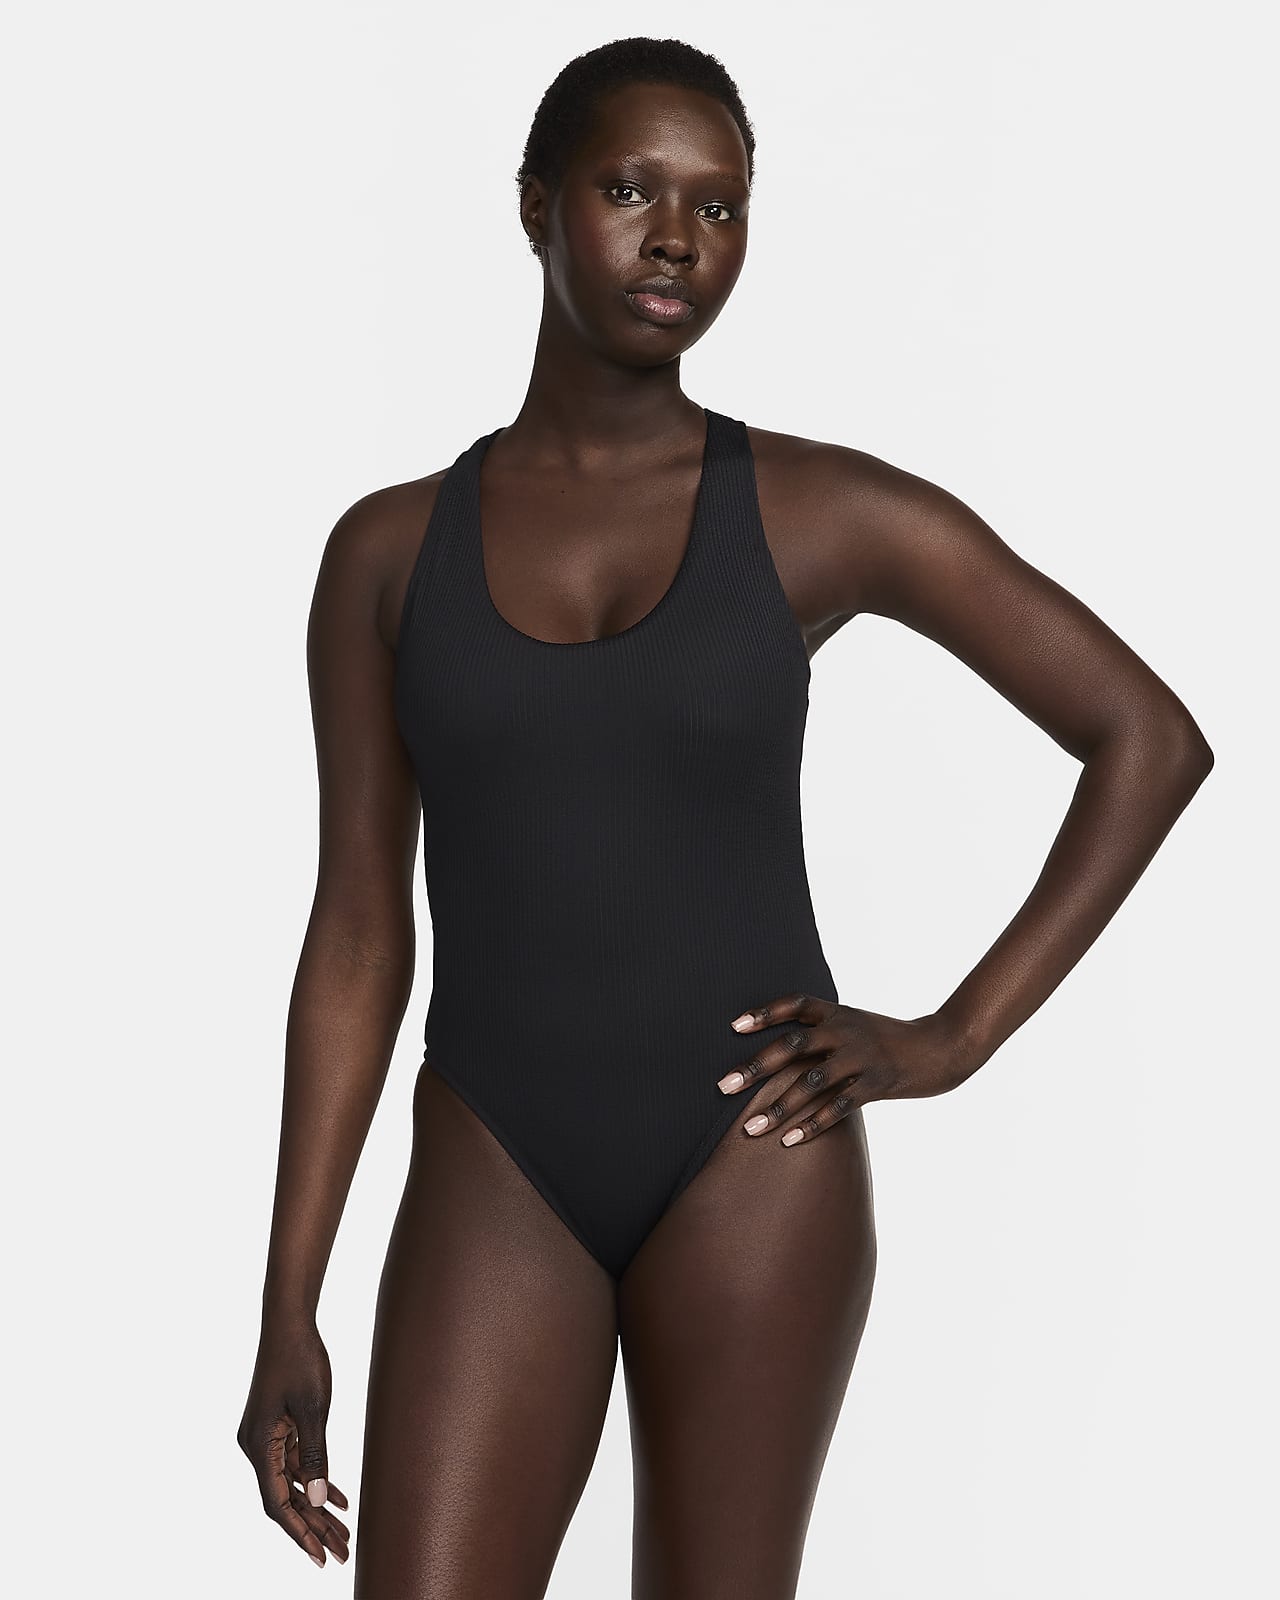  Flow Girls Swimsuit - One Piece Crossback Competitive